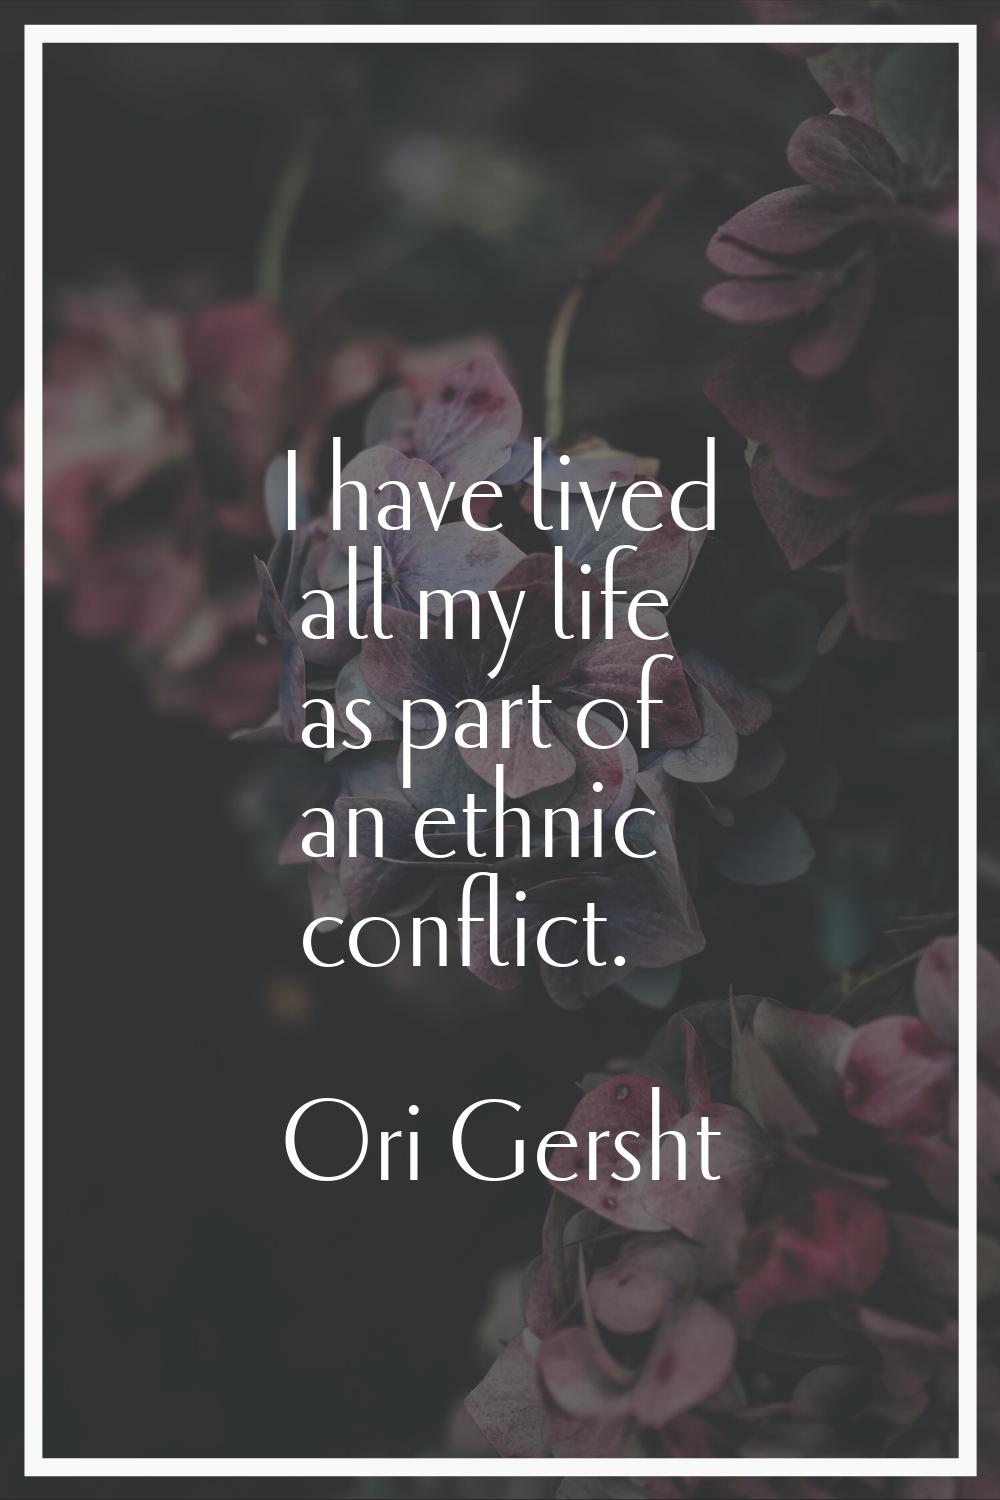 I have lived all my life as part of an ethnic conflict.